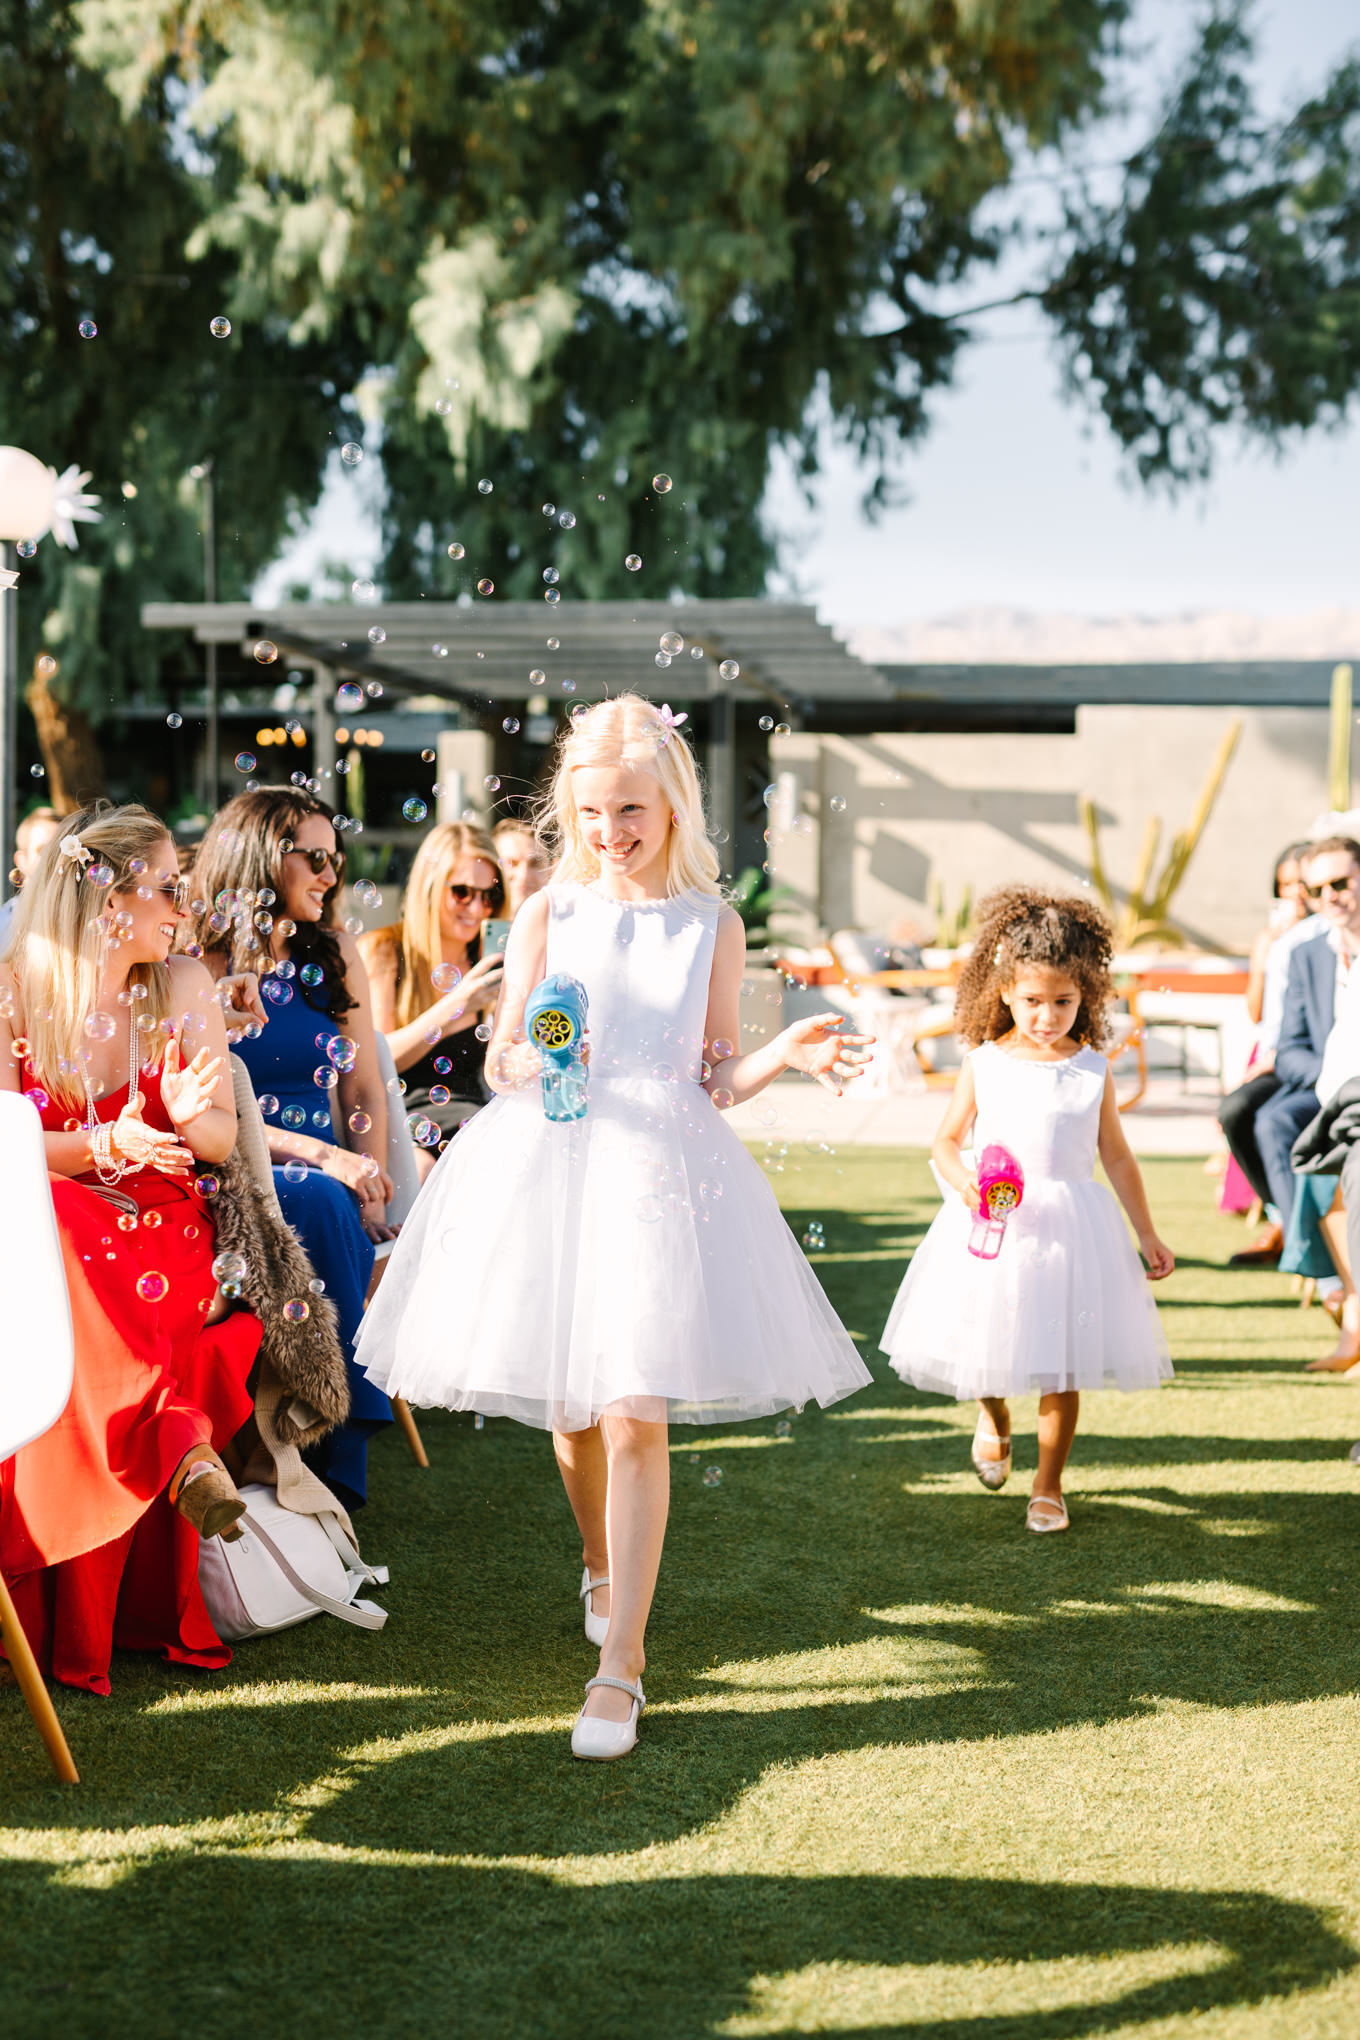 Flower girls with bubble guns | Pink and orange Lautner Compound wedding | Colorful Palm Springs wedding photography | #palmspringsphotographer #palmspringswedding #lautnercompound #southerncaliforniawedding  Source: Mary Costa Photography | Los Angeles